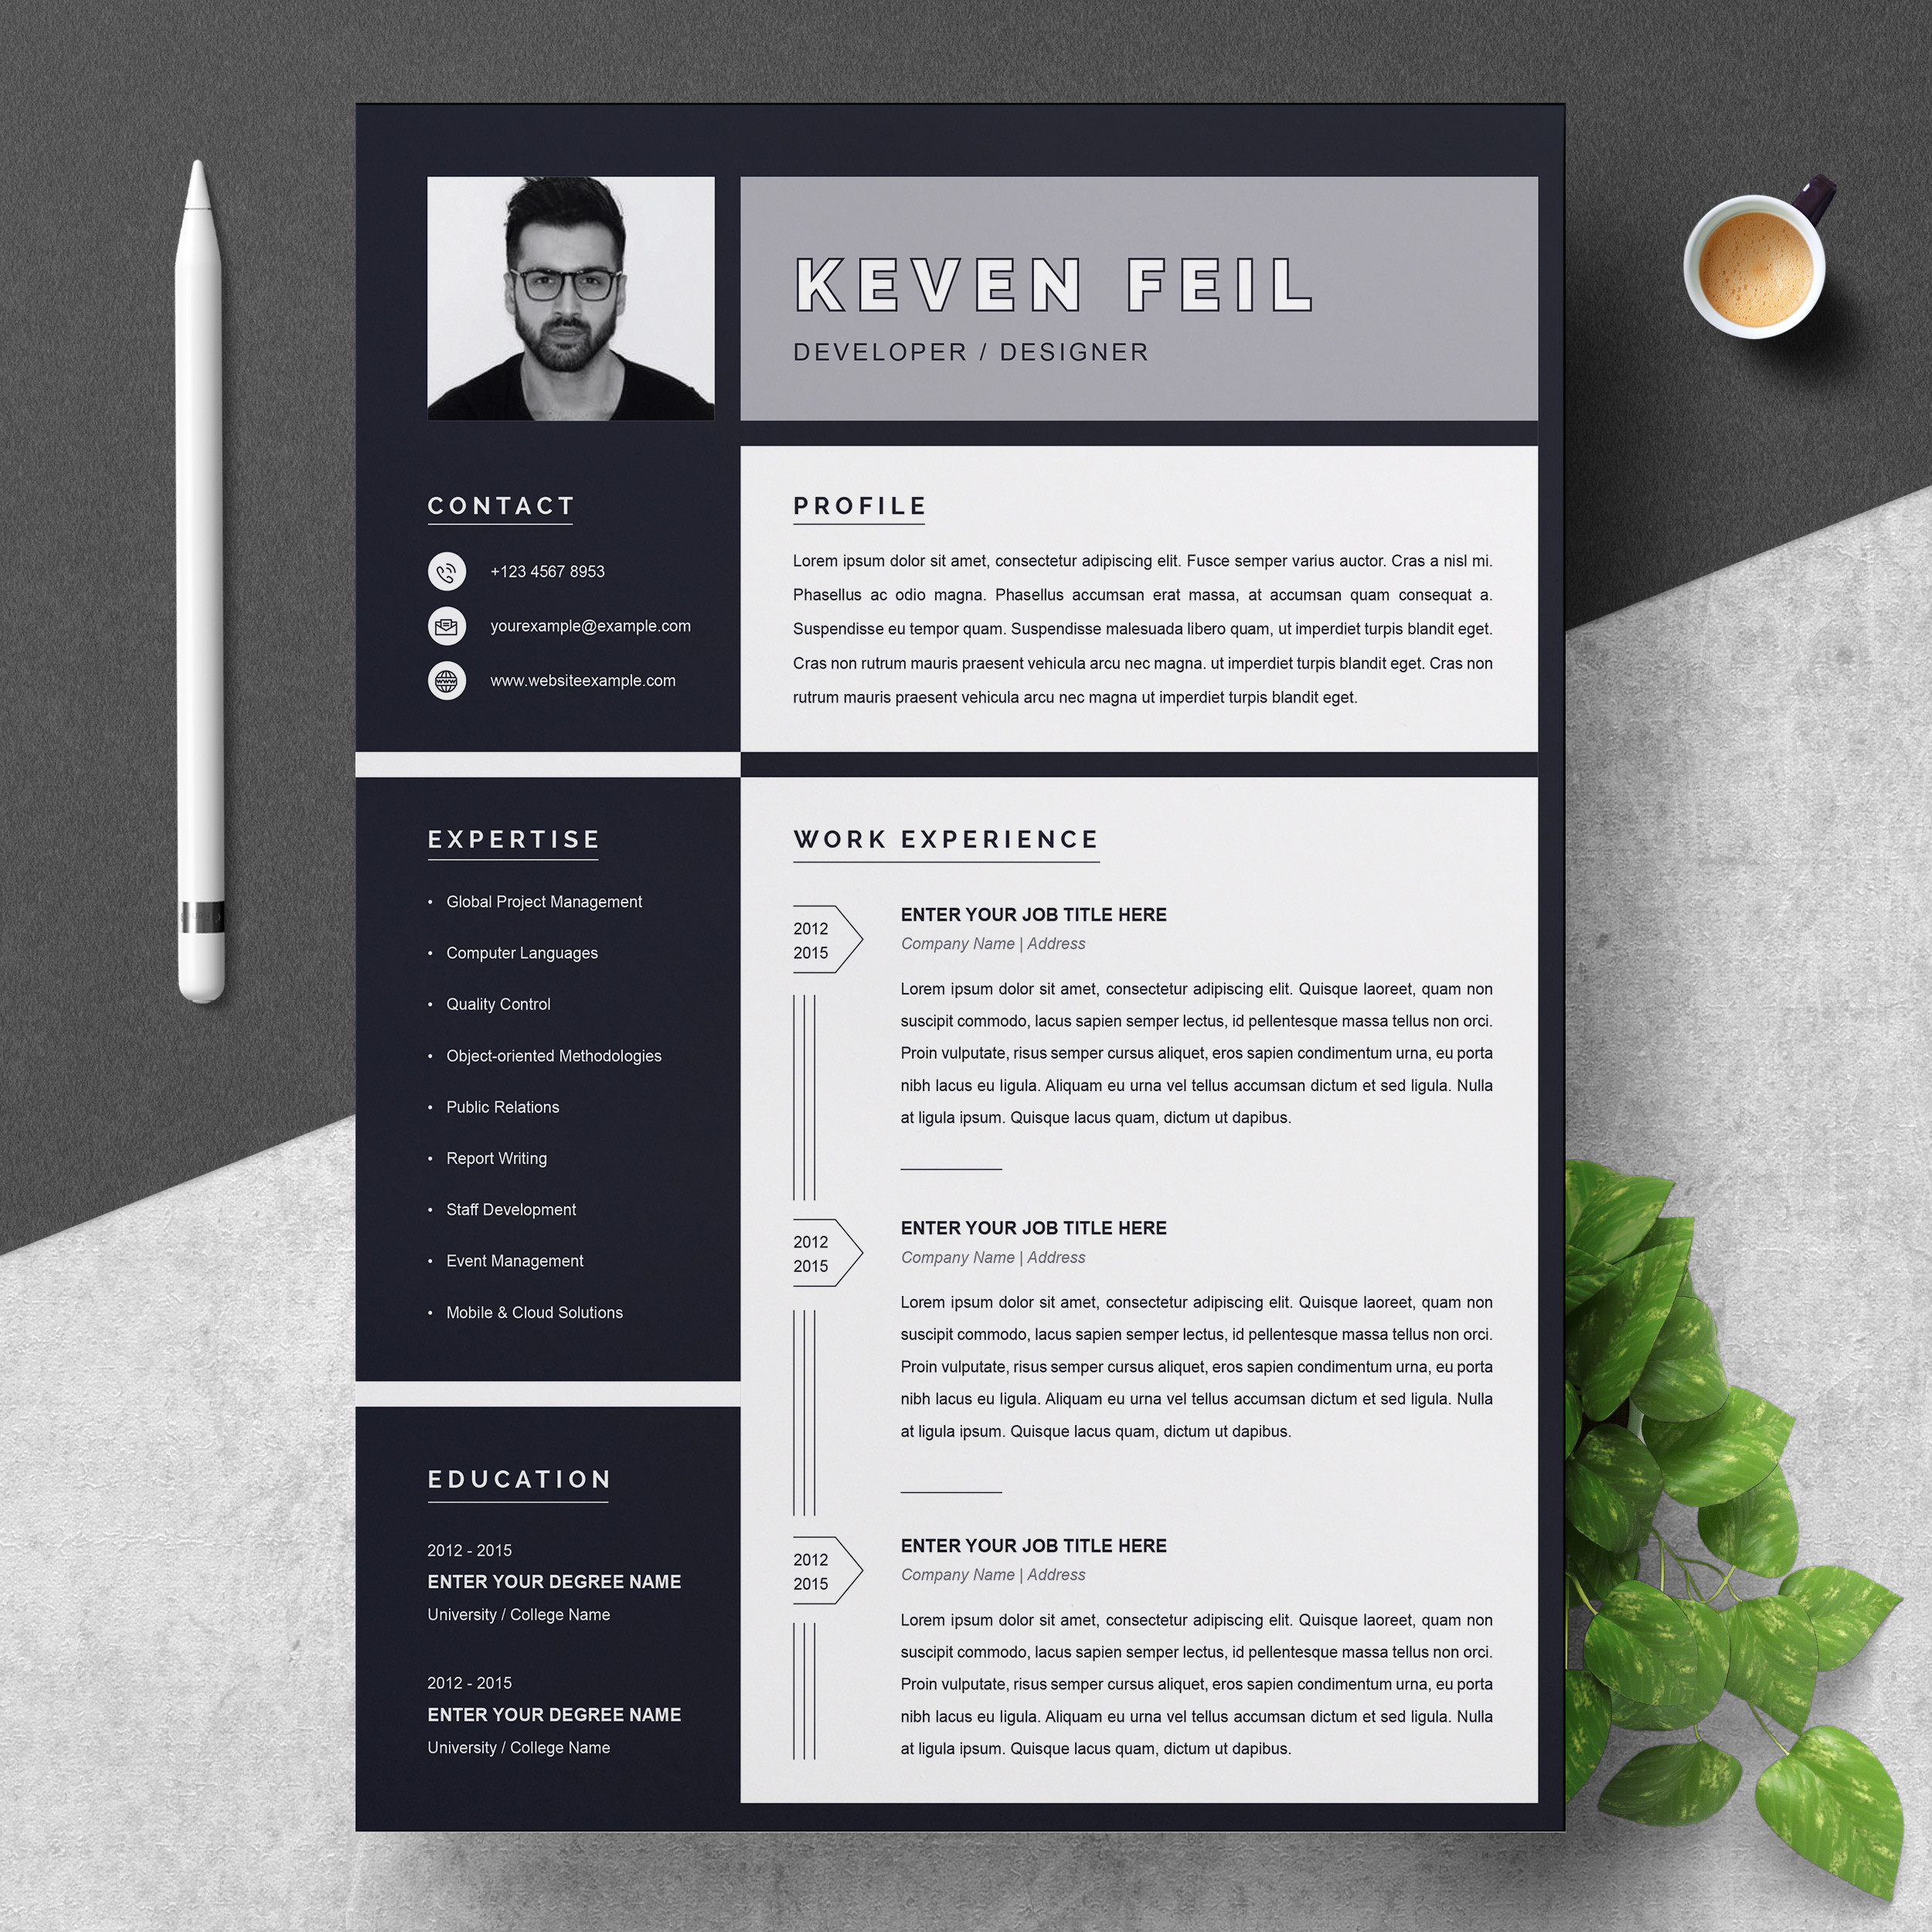 Creative Resume Templates for Freshers Free Download Resume / Cv Template Black & White â Free Resumes, Templates …